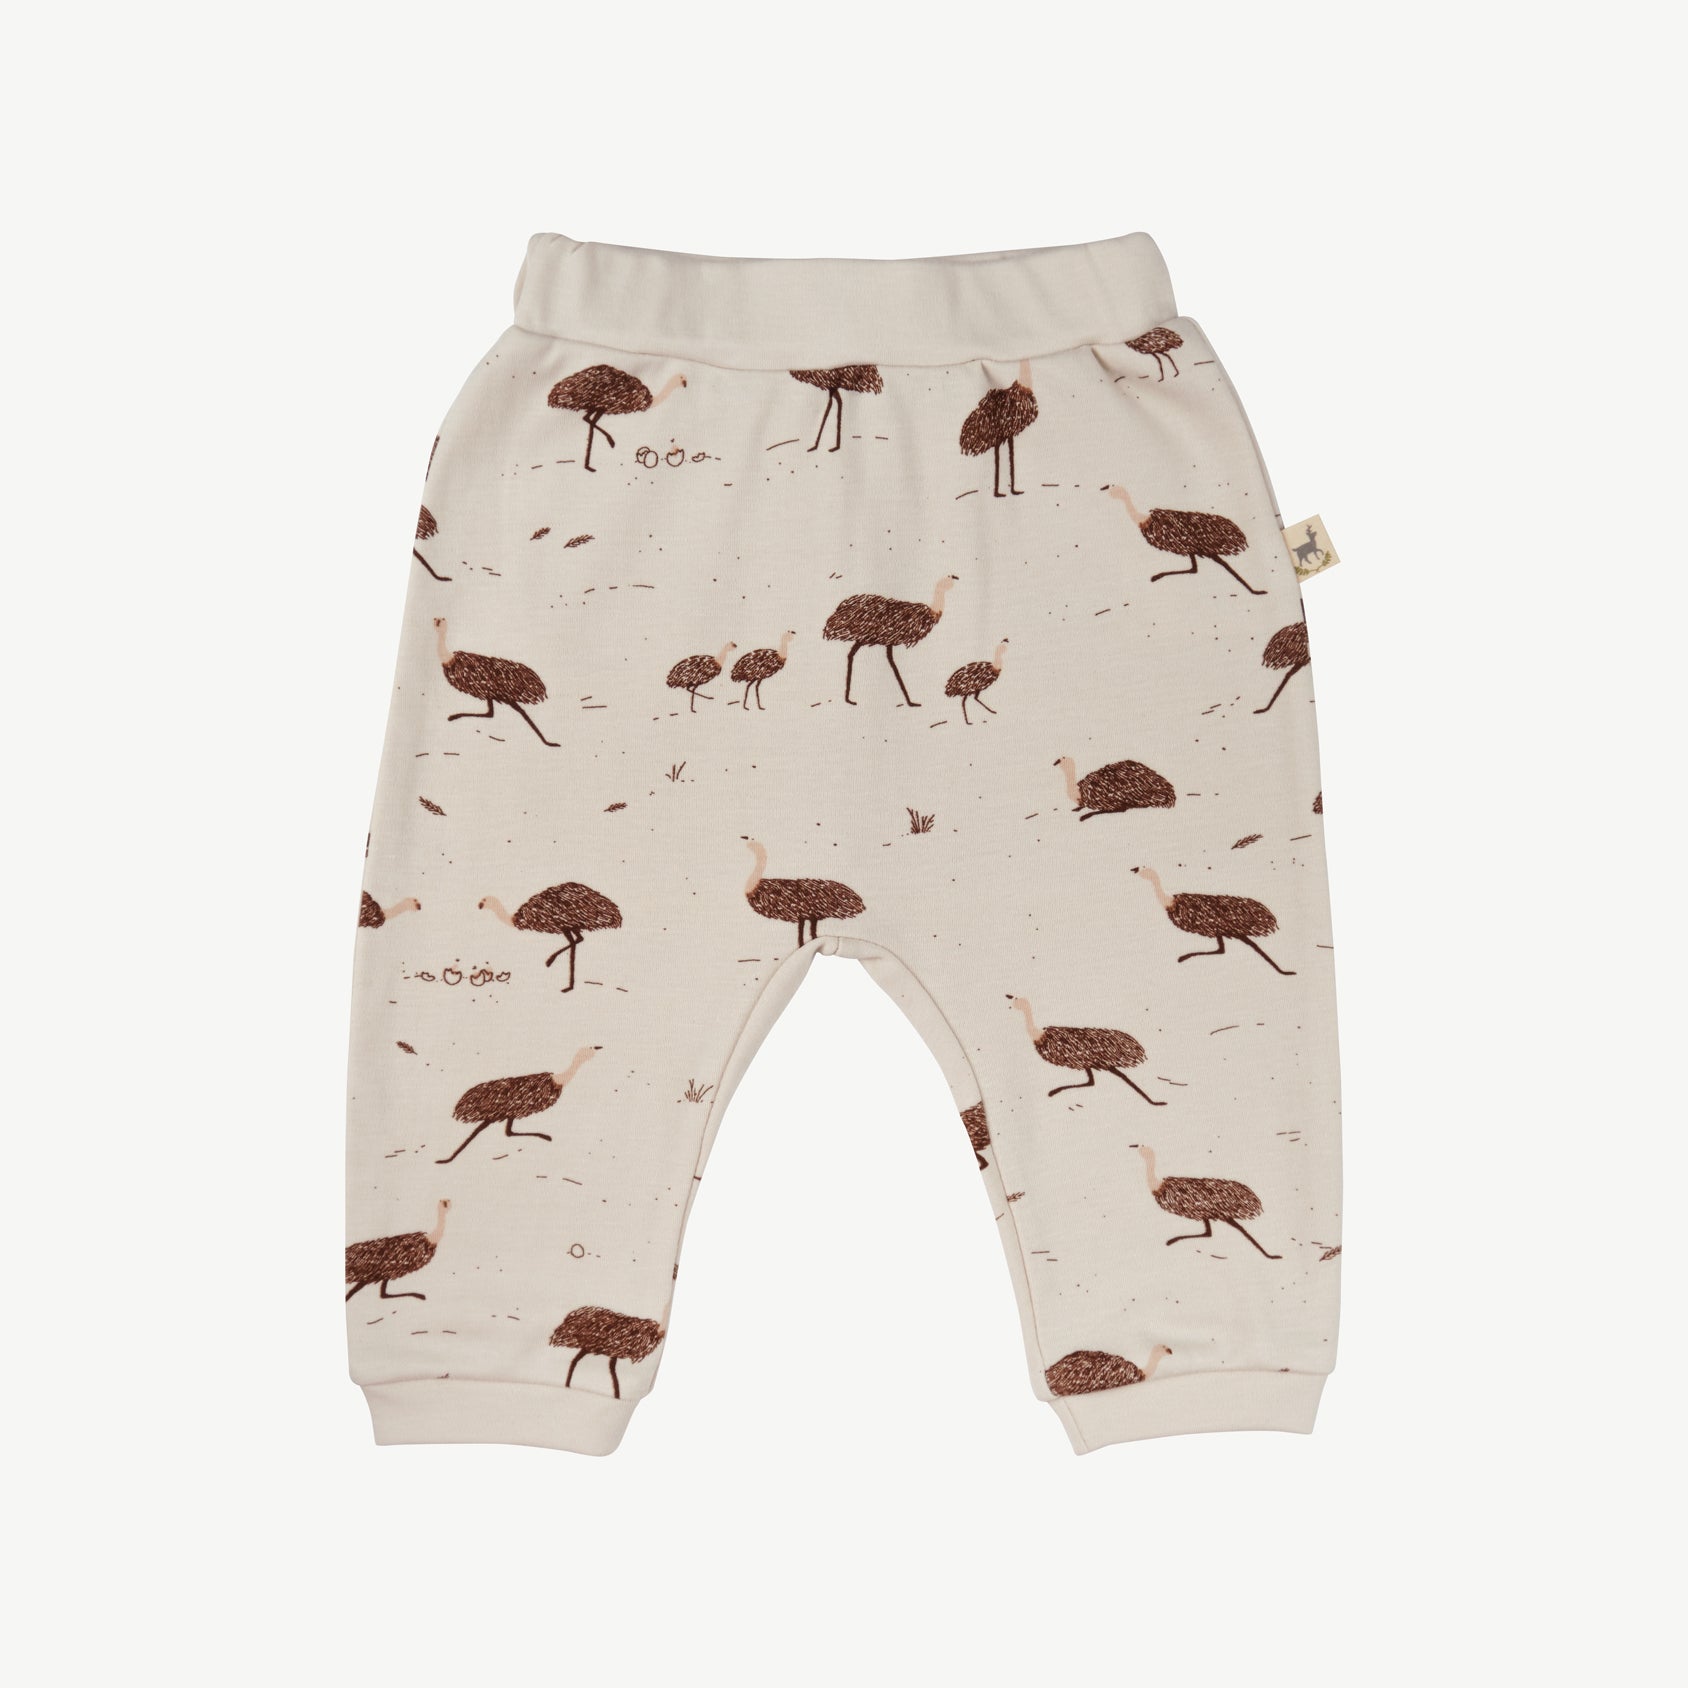 'emus everywhere' rainy day onesie + pants baby outfit